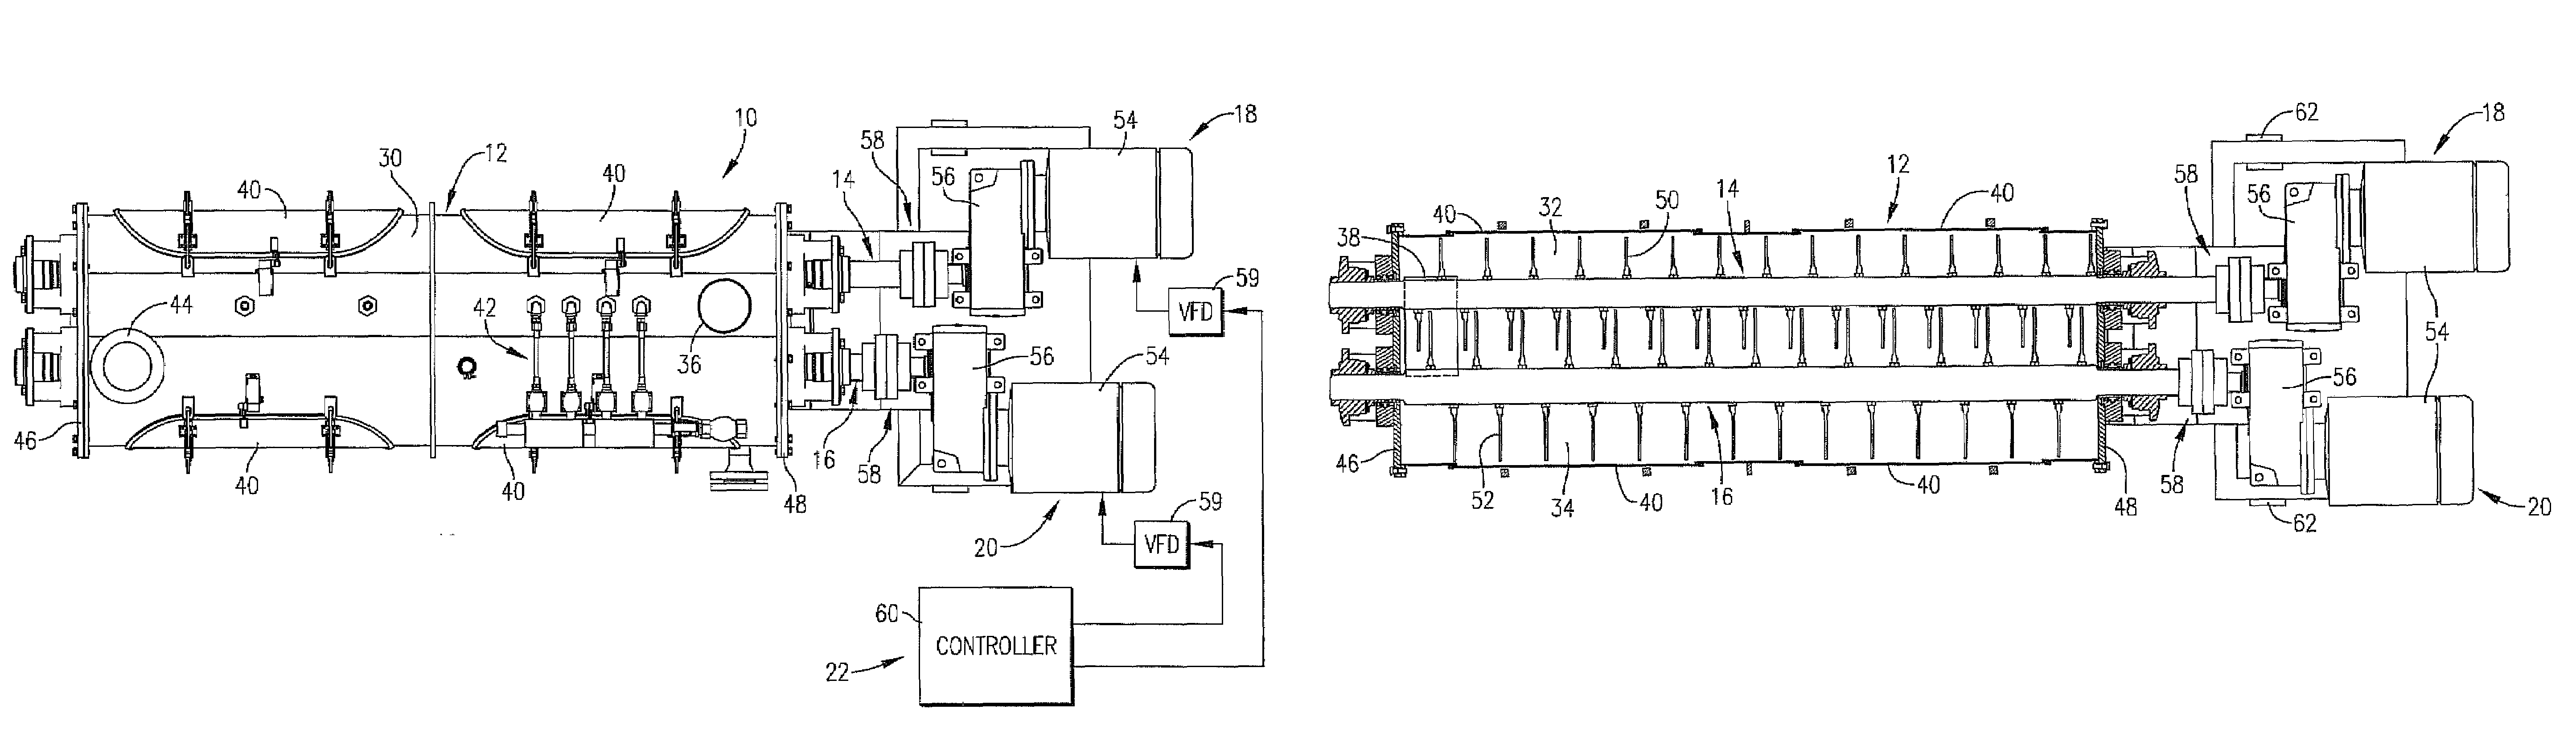 Preconditioner having mixer shafts independently driven with variable frequency drives